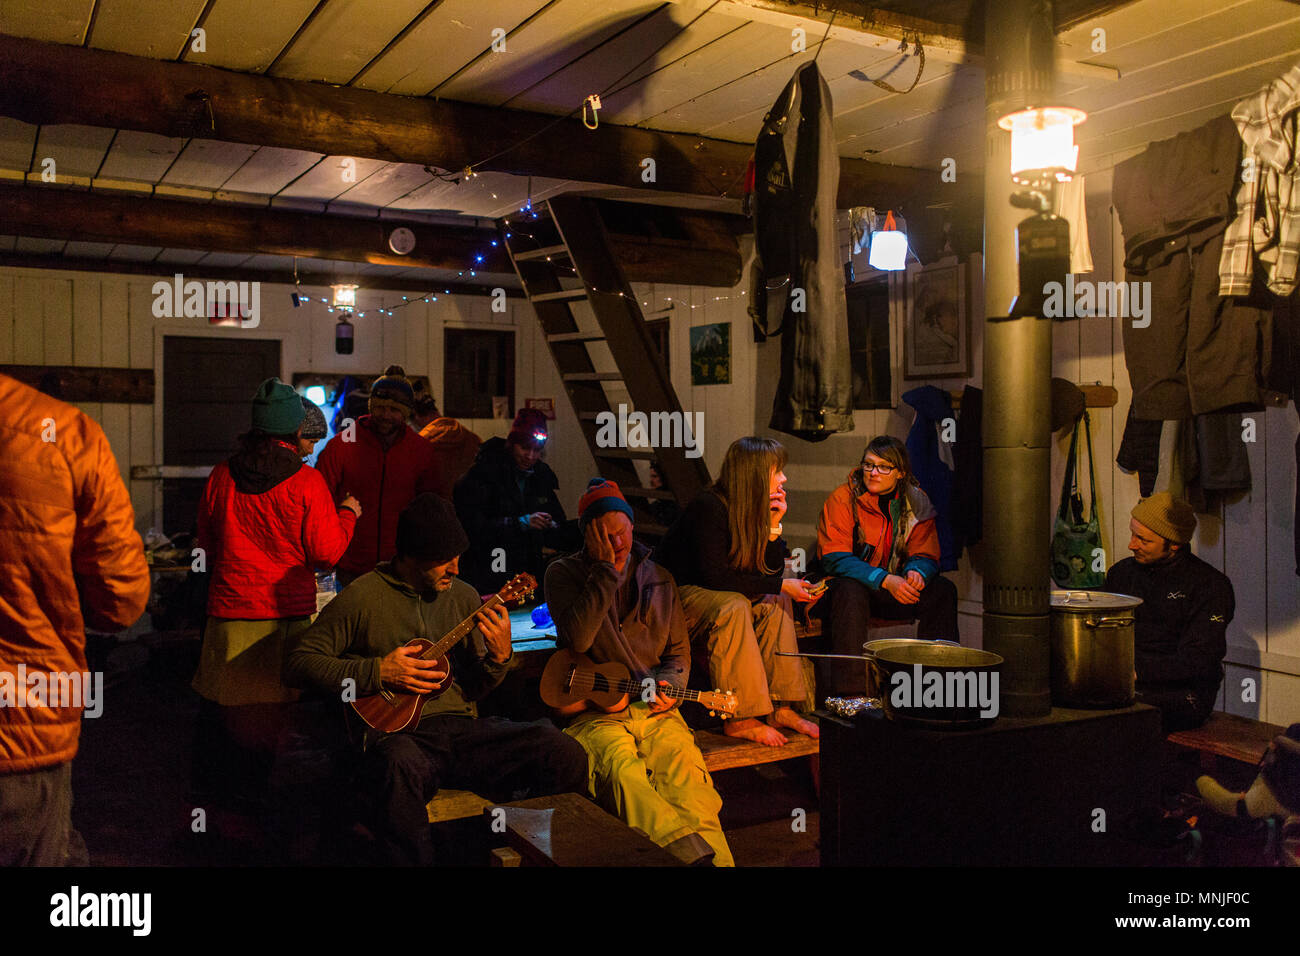 Group of people relaxing in backcountry hut near Mount Hood, Oregon, USA Stock Photo